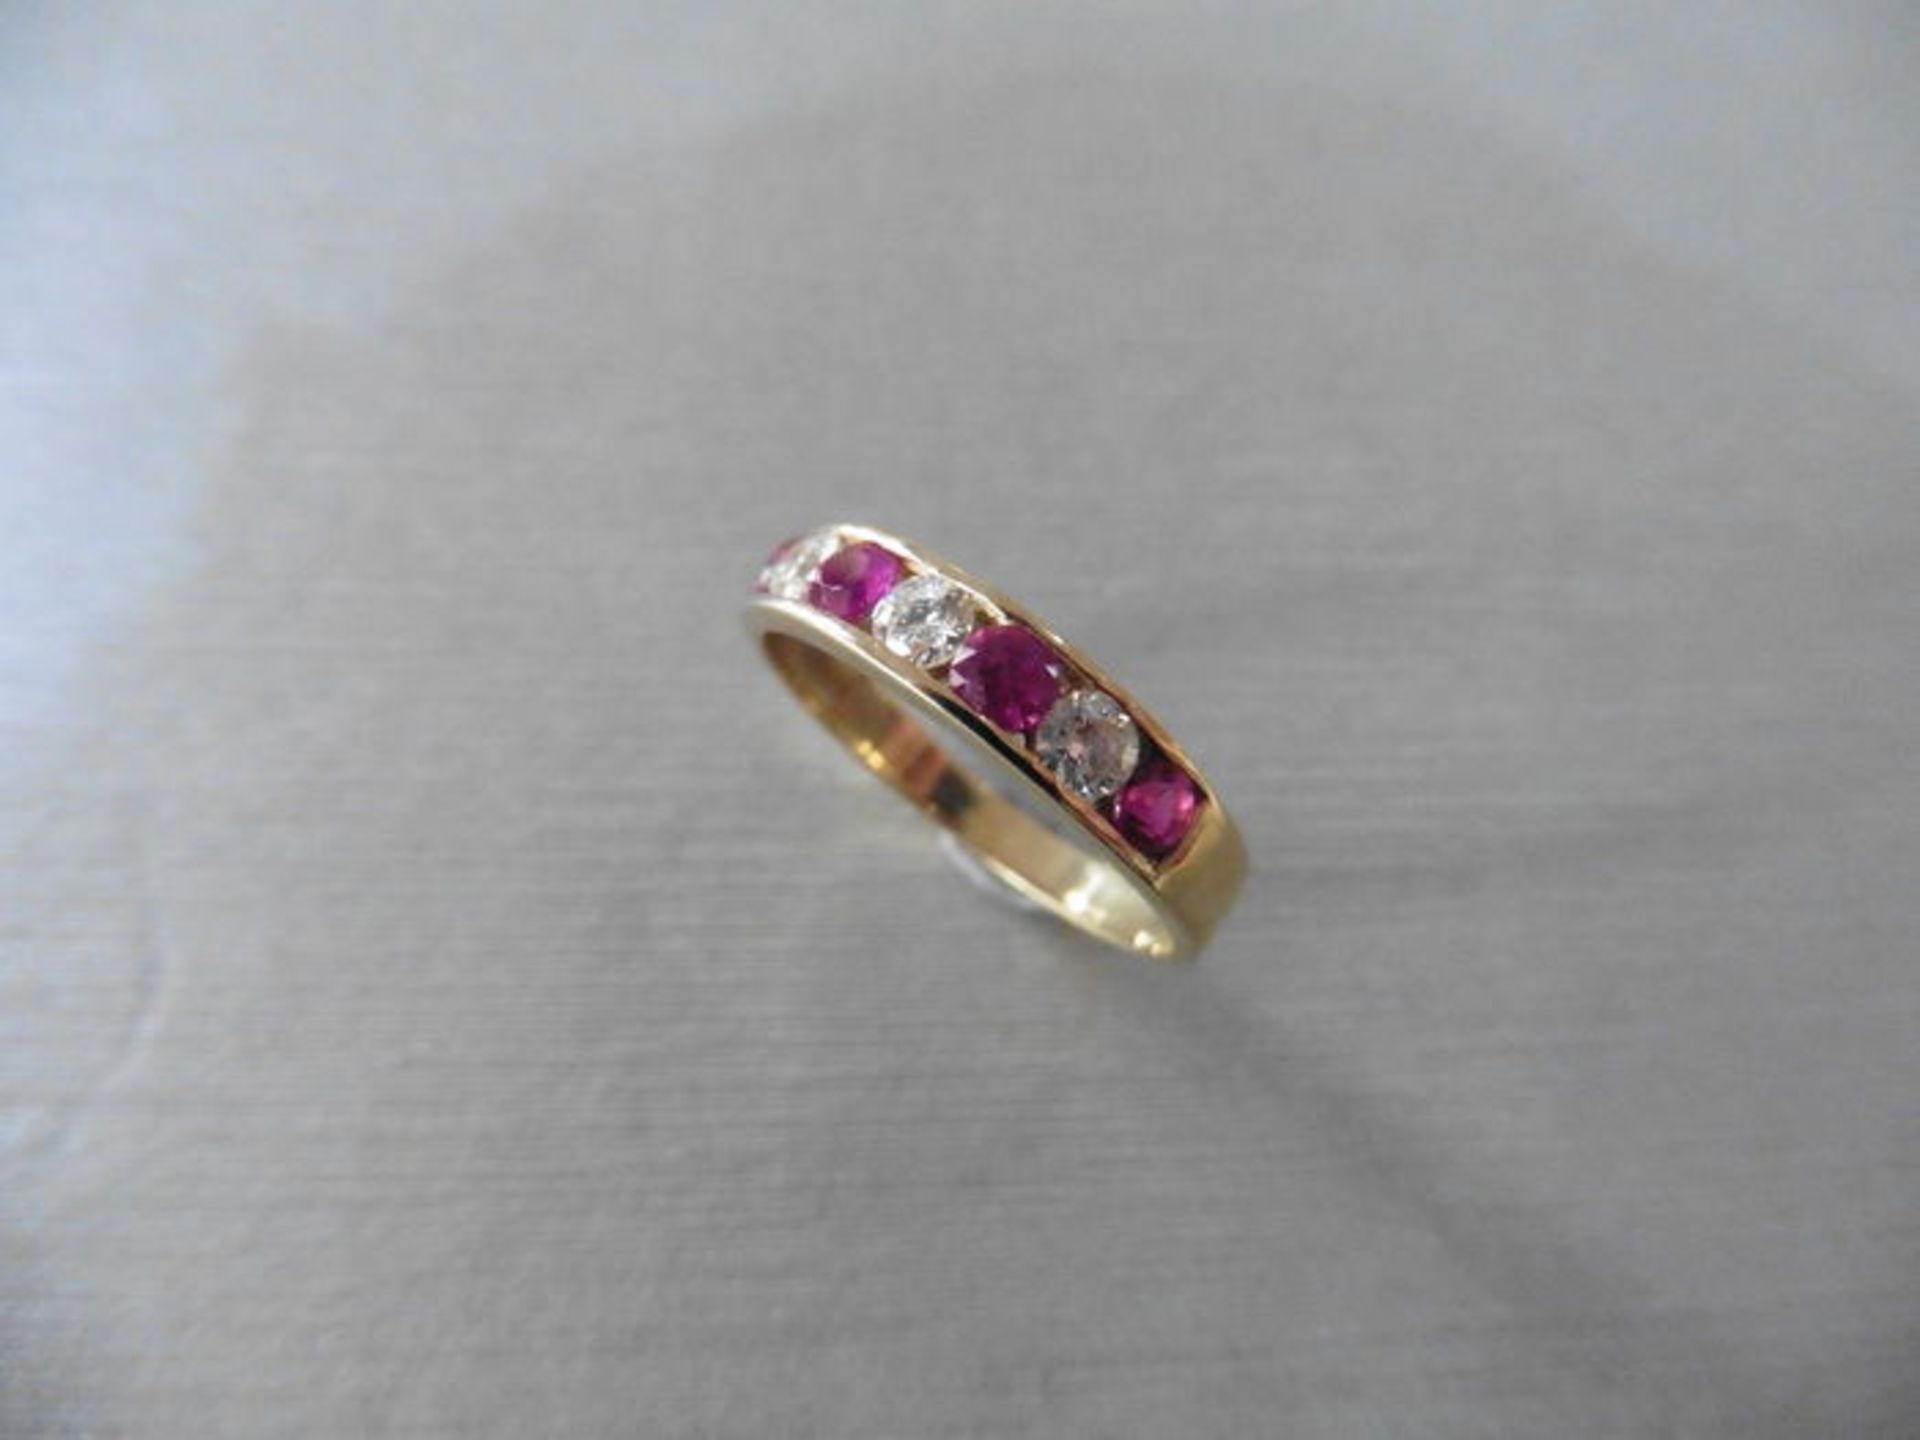 Ruby and diamond eternity band ring set in 9ct white gold. 4 small round cut rubies ( treated )0. - Image 3 of 3